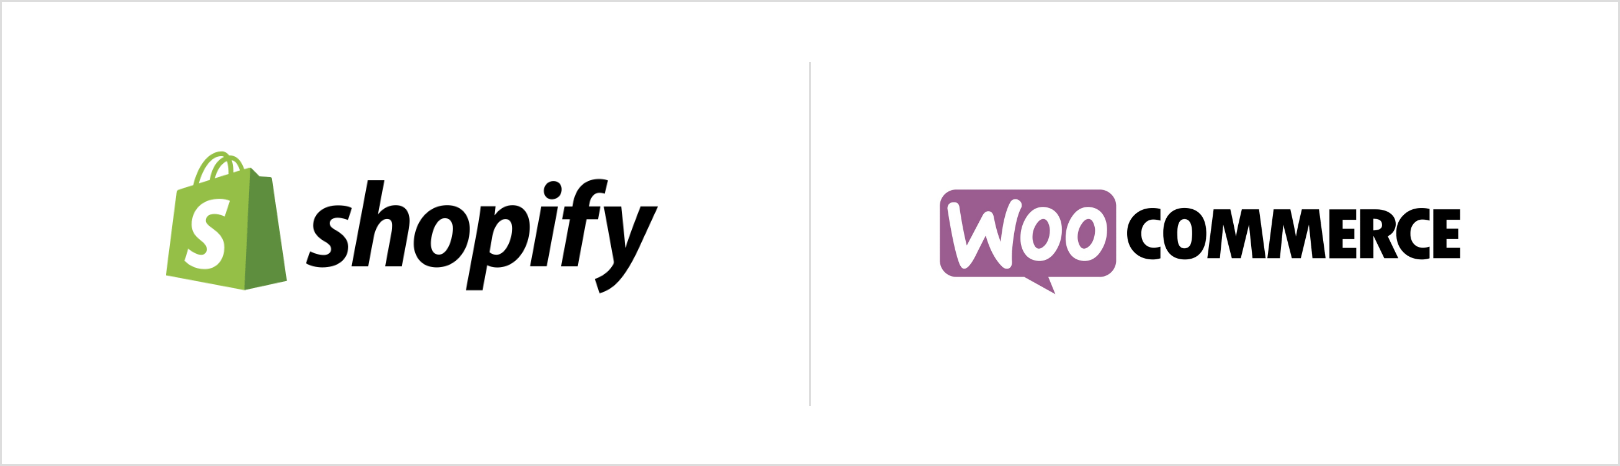 Shopify and WooCommerce@2x